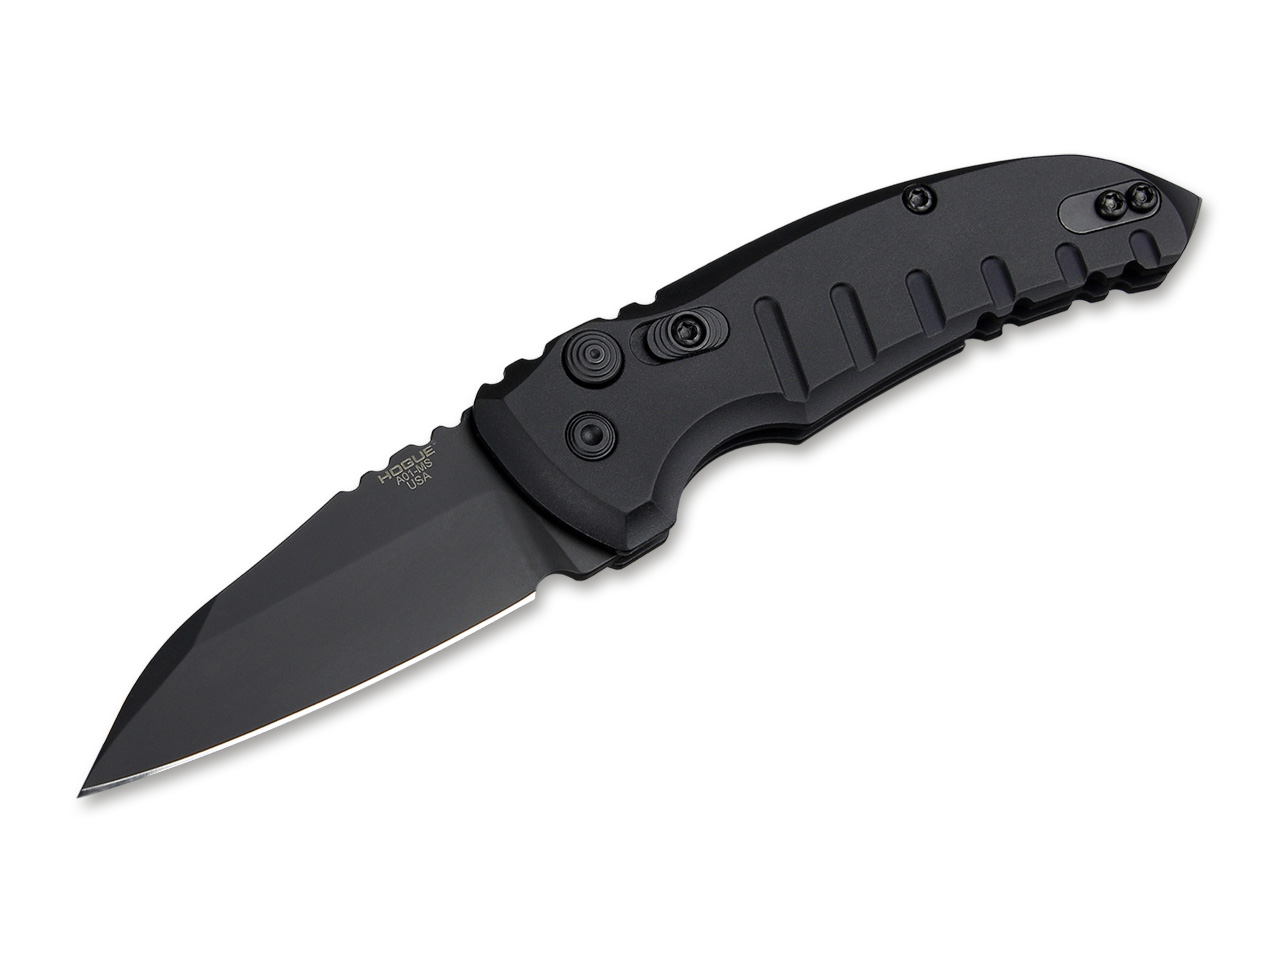 A01 Microswitch Wharncliffe All Black